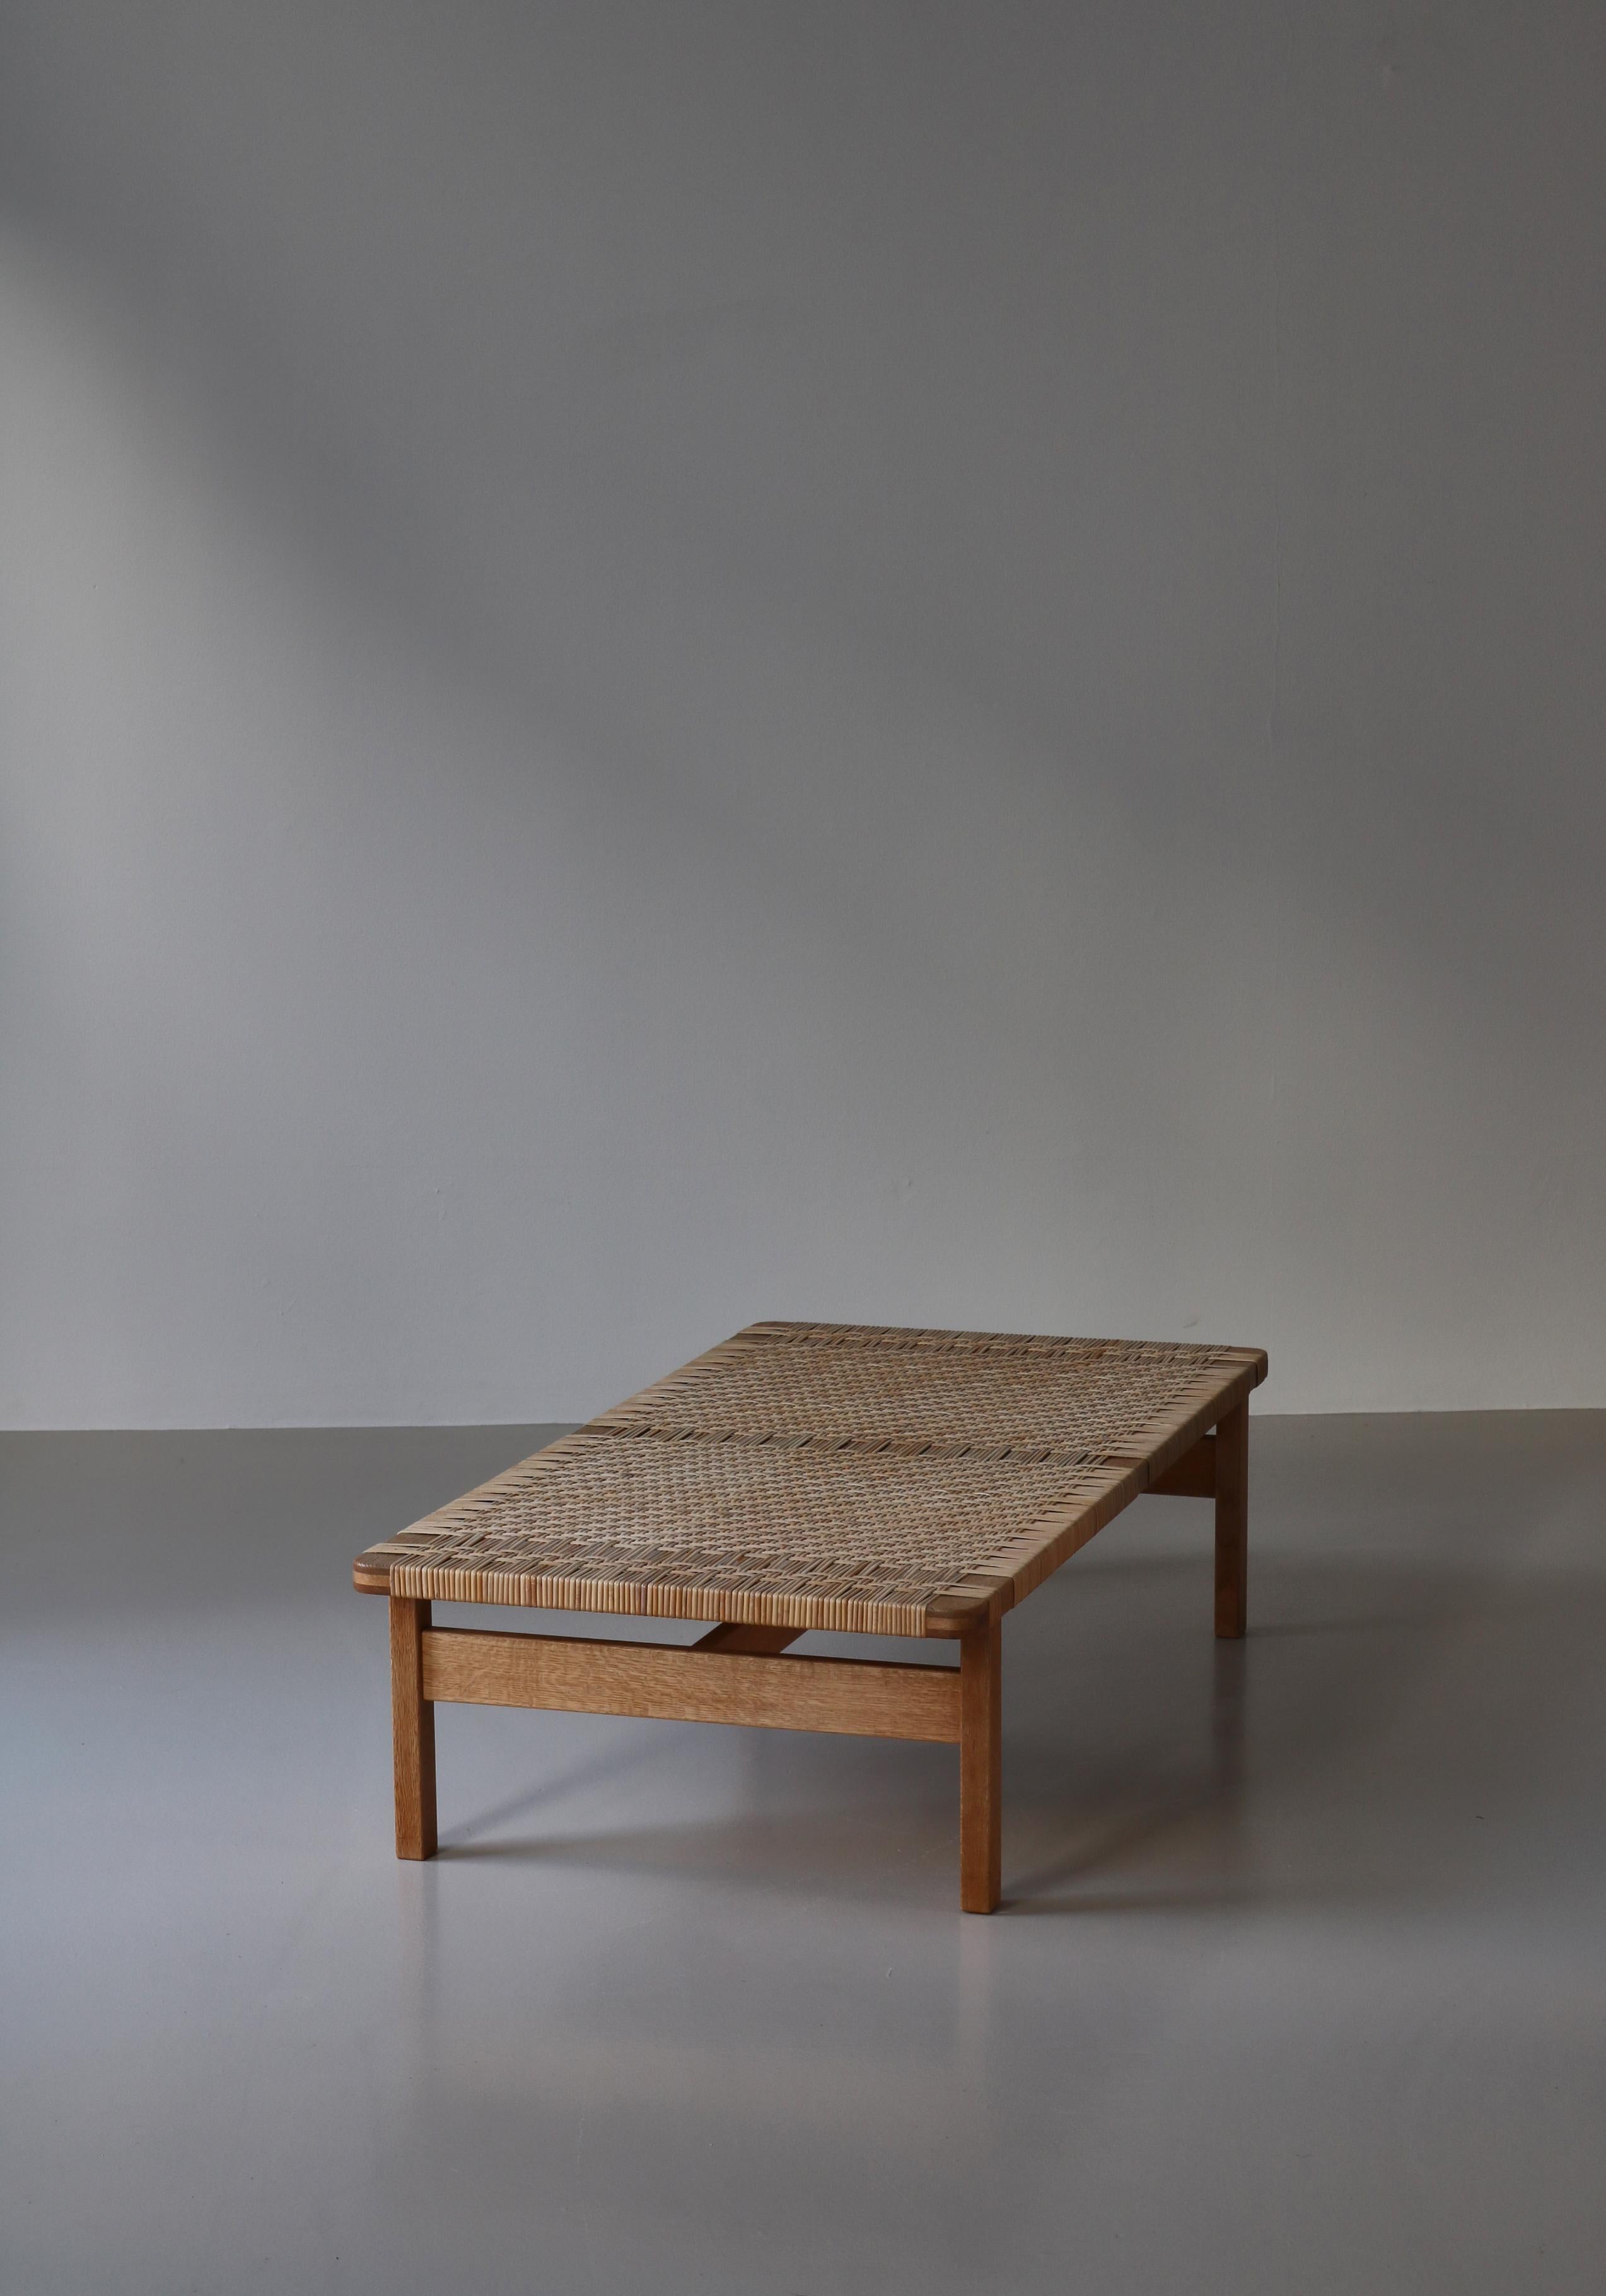 Borge Mogensen Large Side Table or Bench in Oak and Rattan Cane, 1960s, Denmark For Sale 1